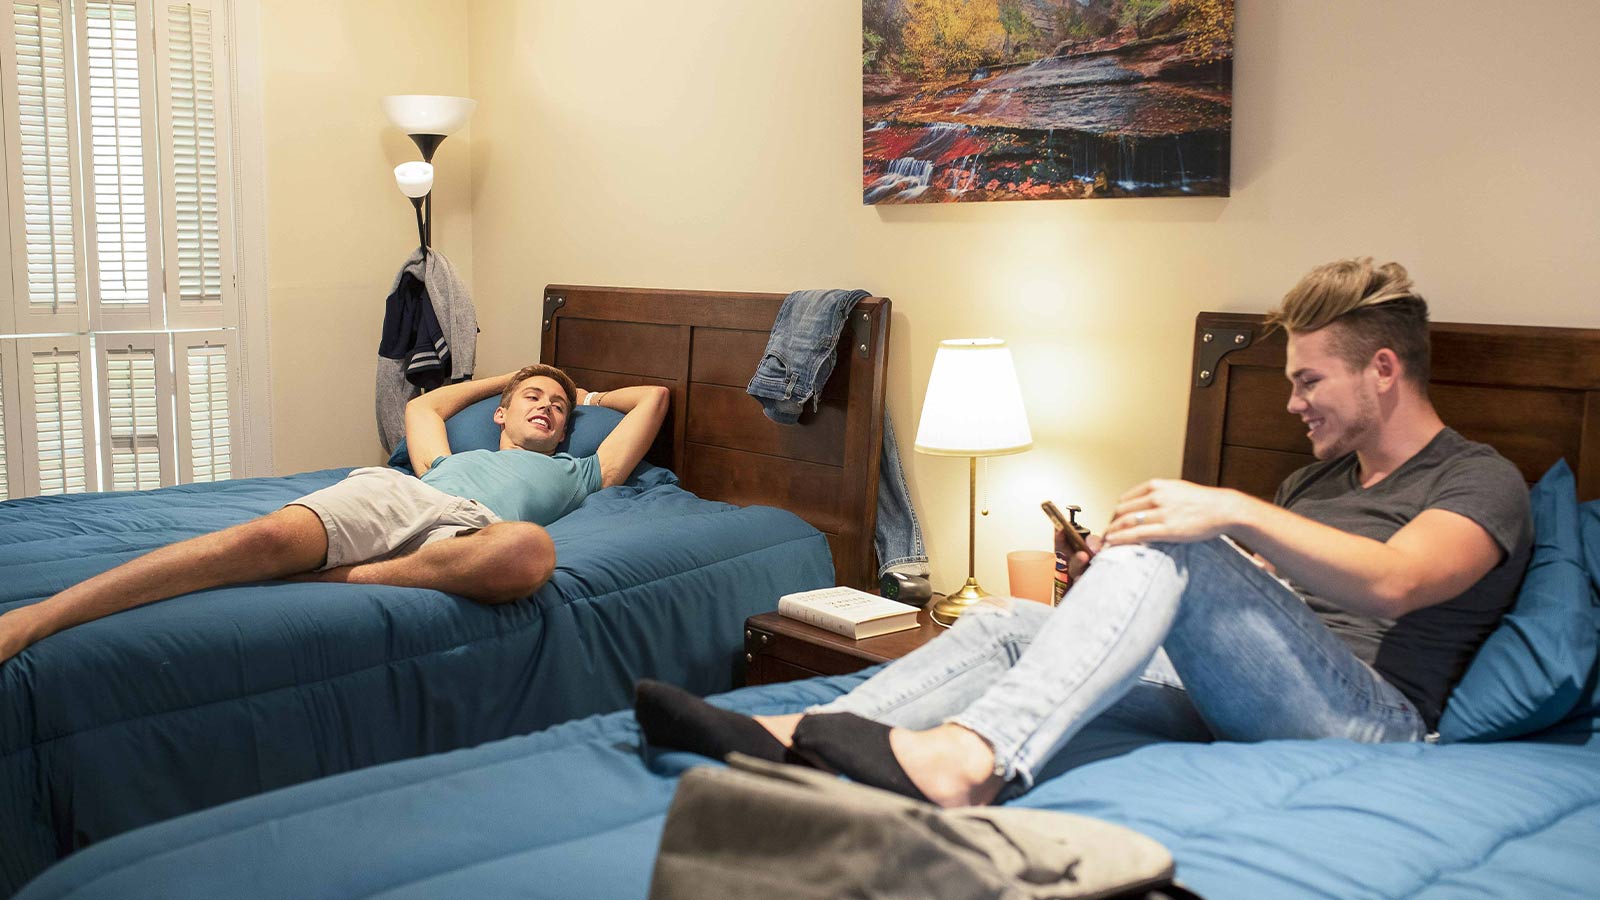 Two young men lounging on beds, relaxing and enjoying activities in a cozy room.